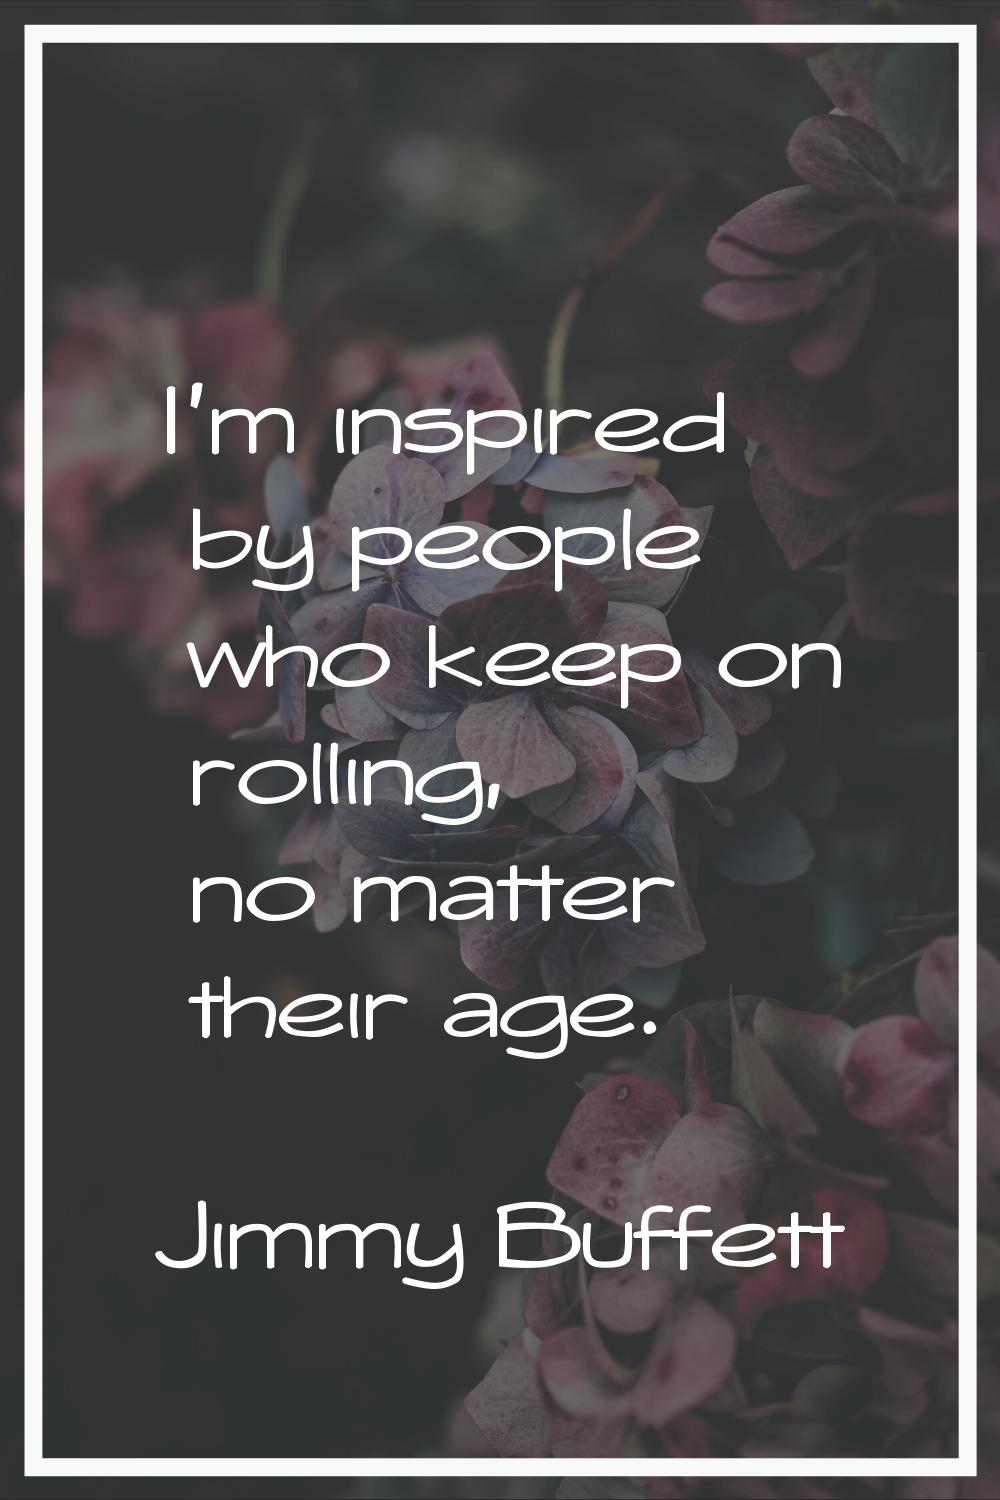 I'm inspired by people who keep on rolling, no matter their age.